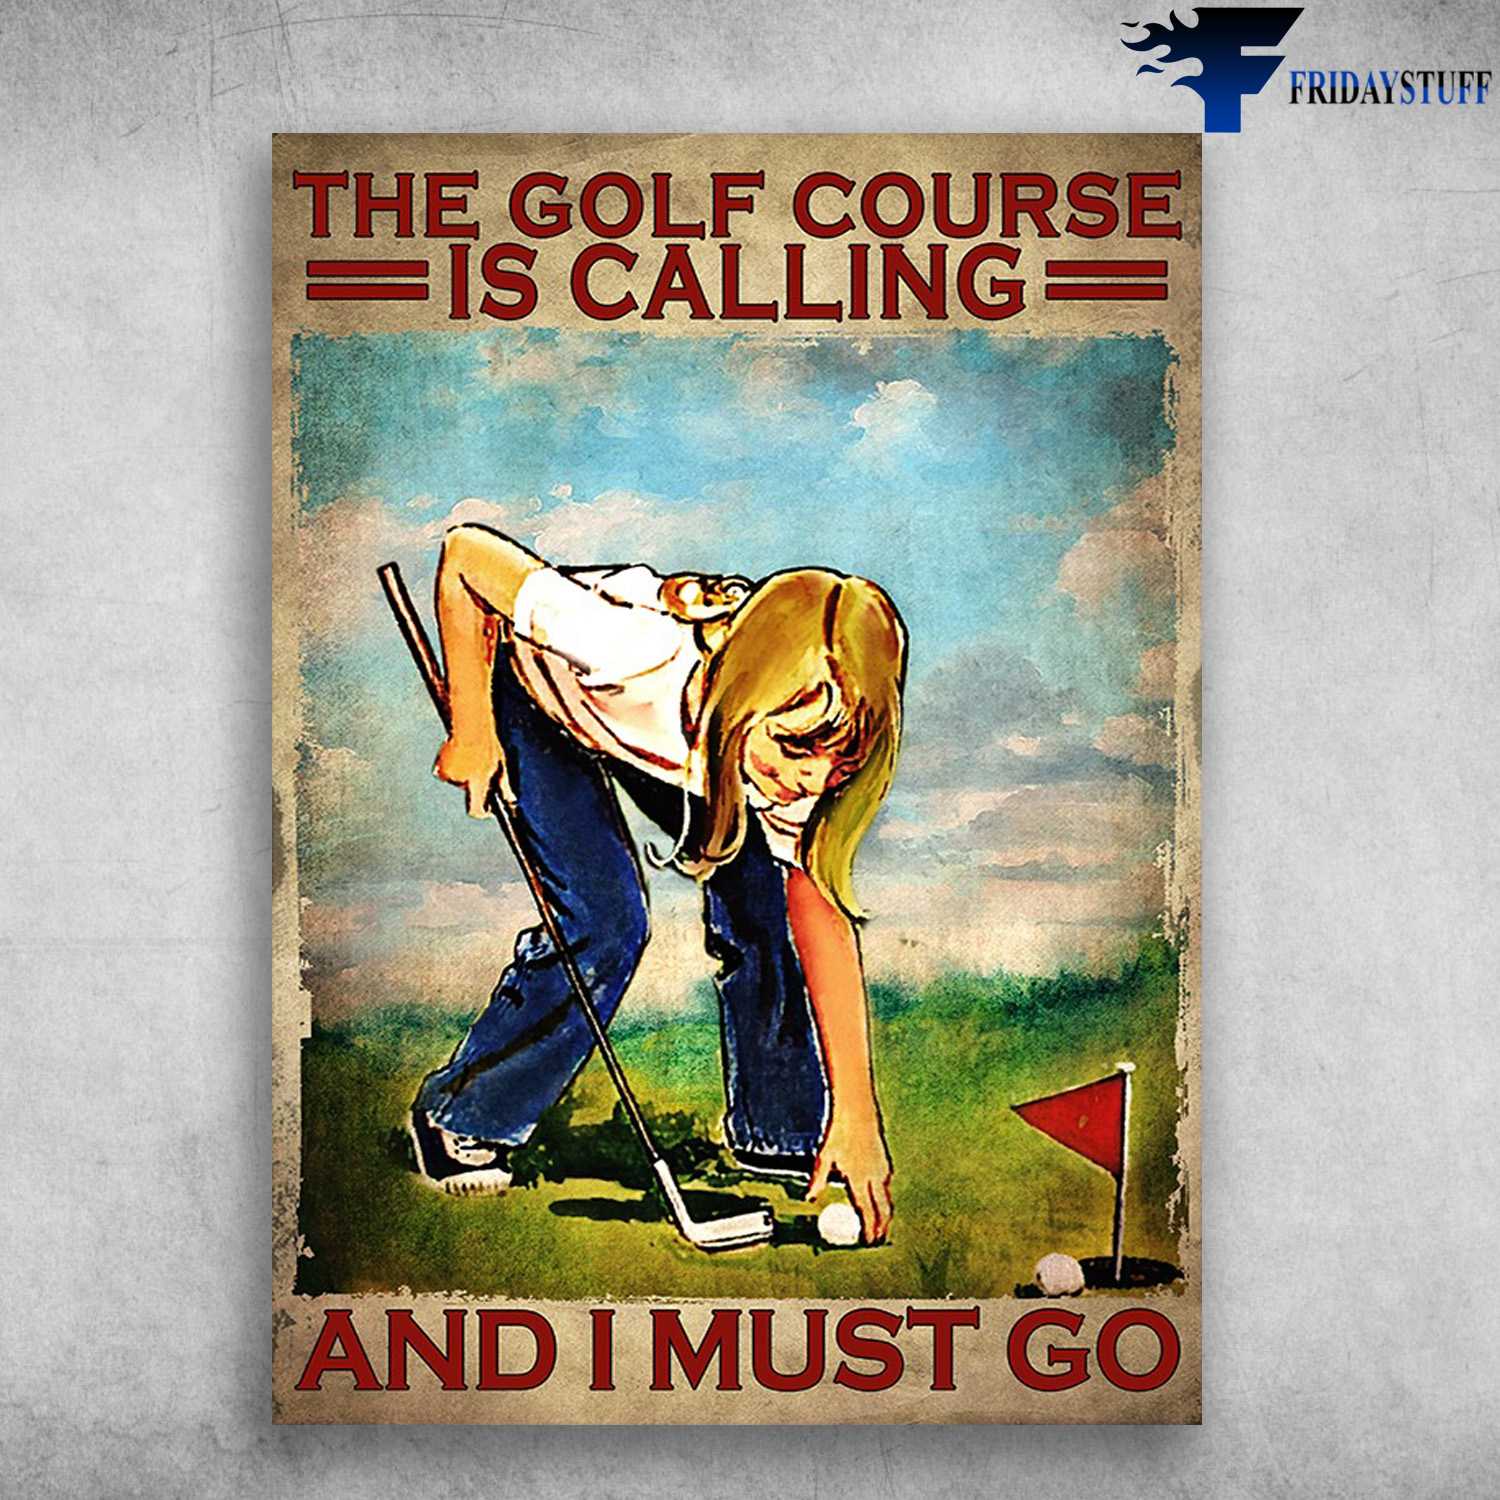 Little Girl Loves Golf - The Golf Course Is Calling, And I Must Go